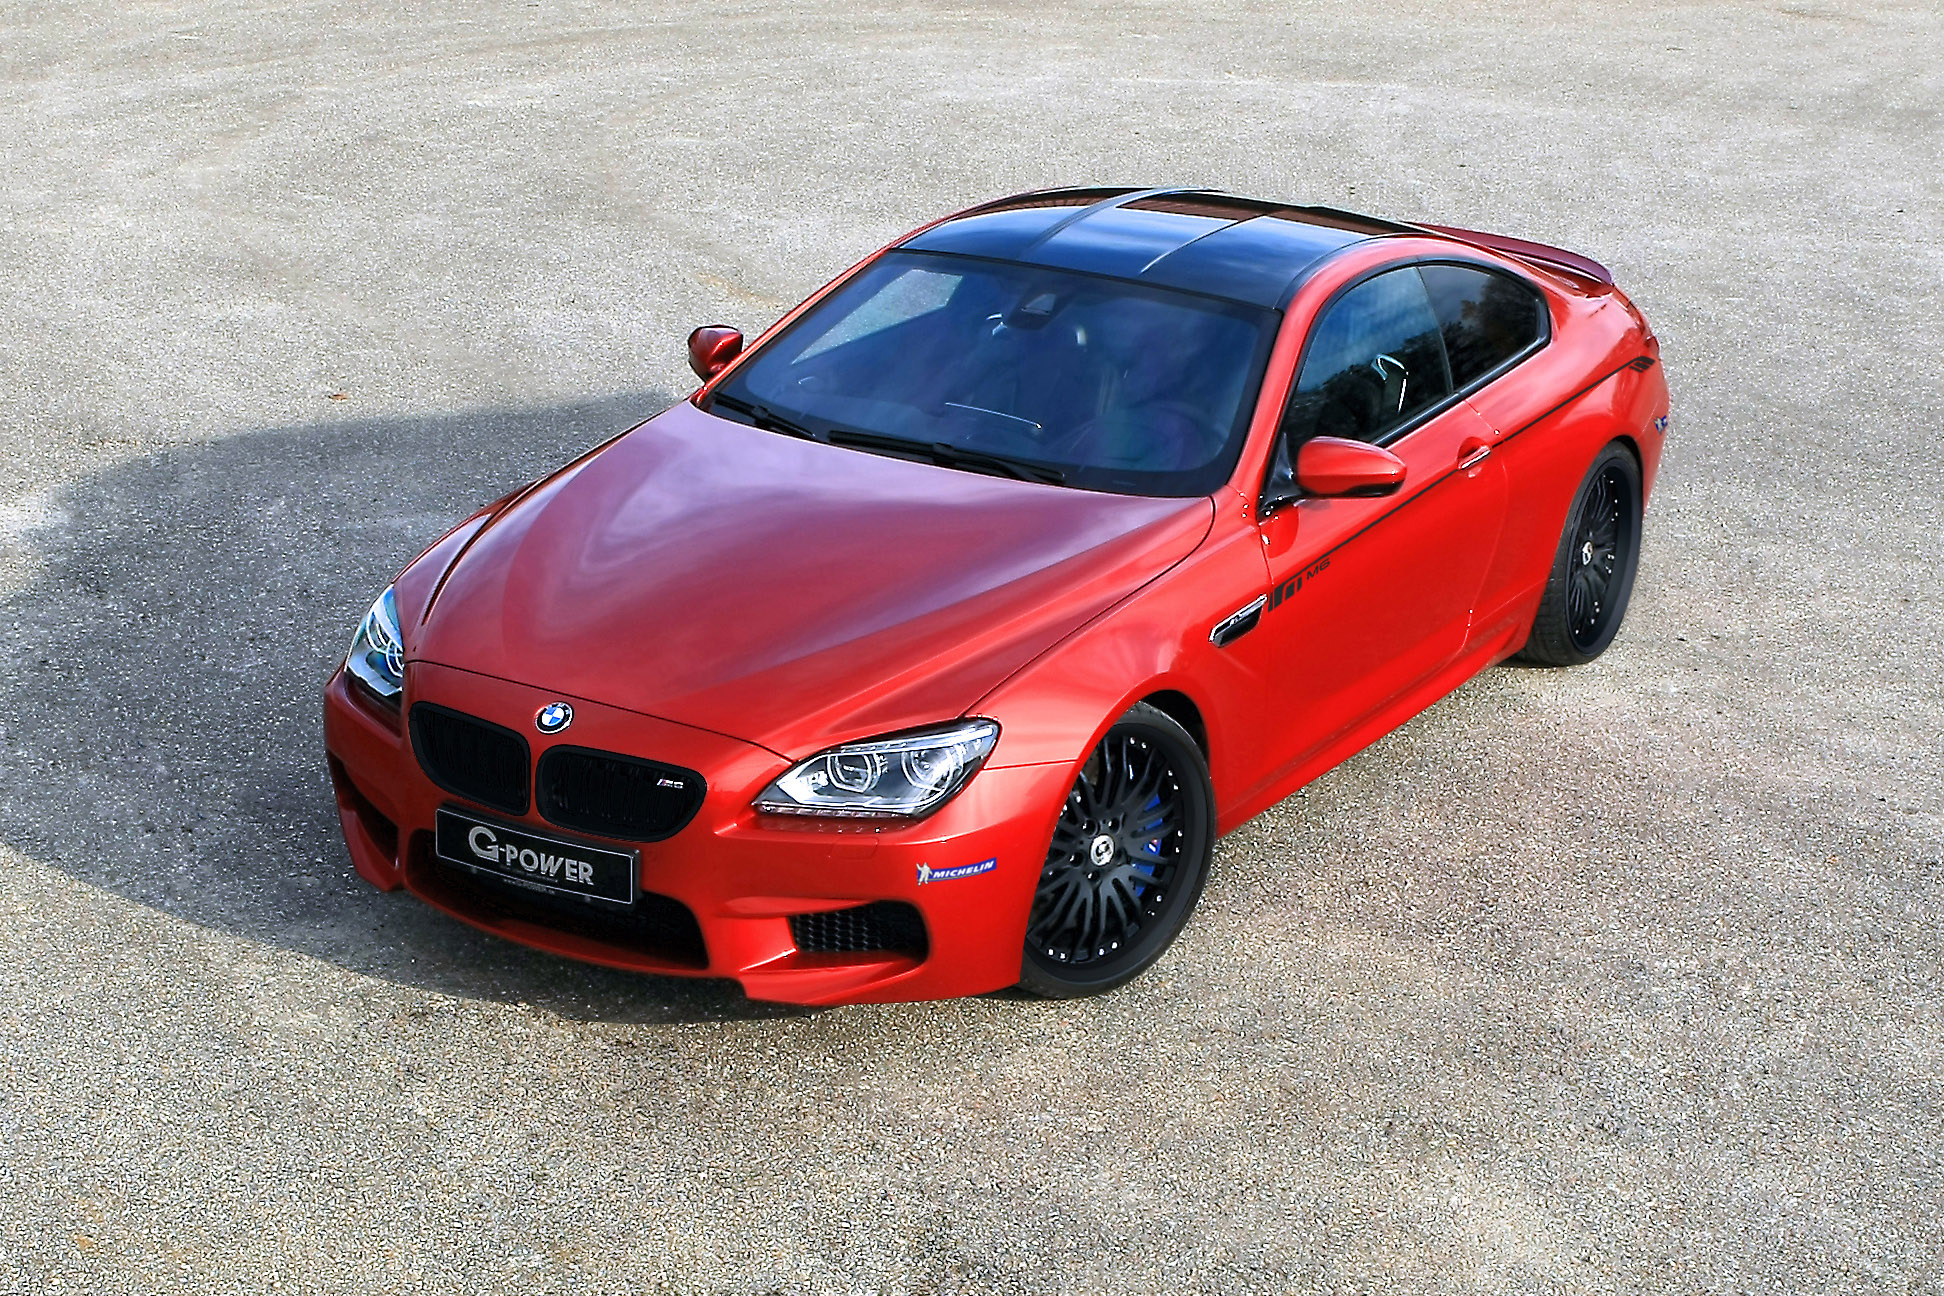 2013, G power, Bmw, M 6, F12, Coupe, Tuning Wallpaper